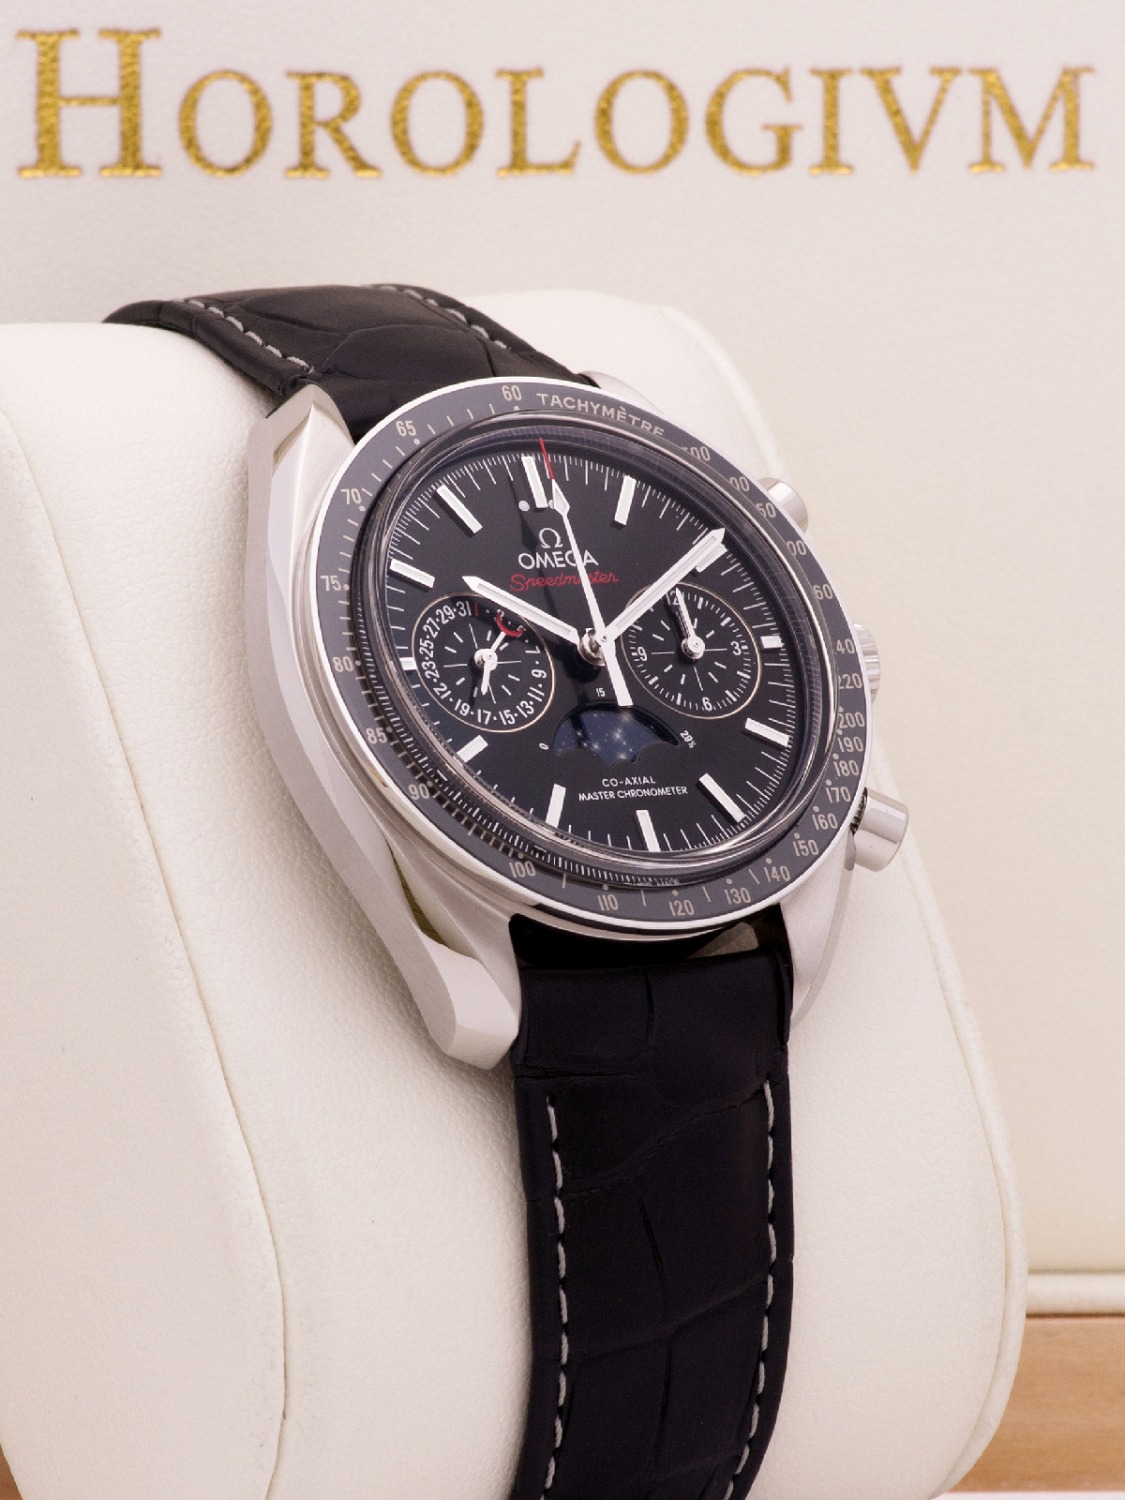 Omega Speedmaster Moonwatch Co-Axial Master Chronometer Moonphase Chronograph watch, silver